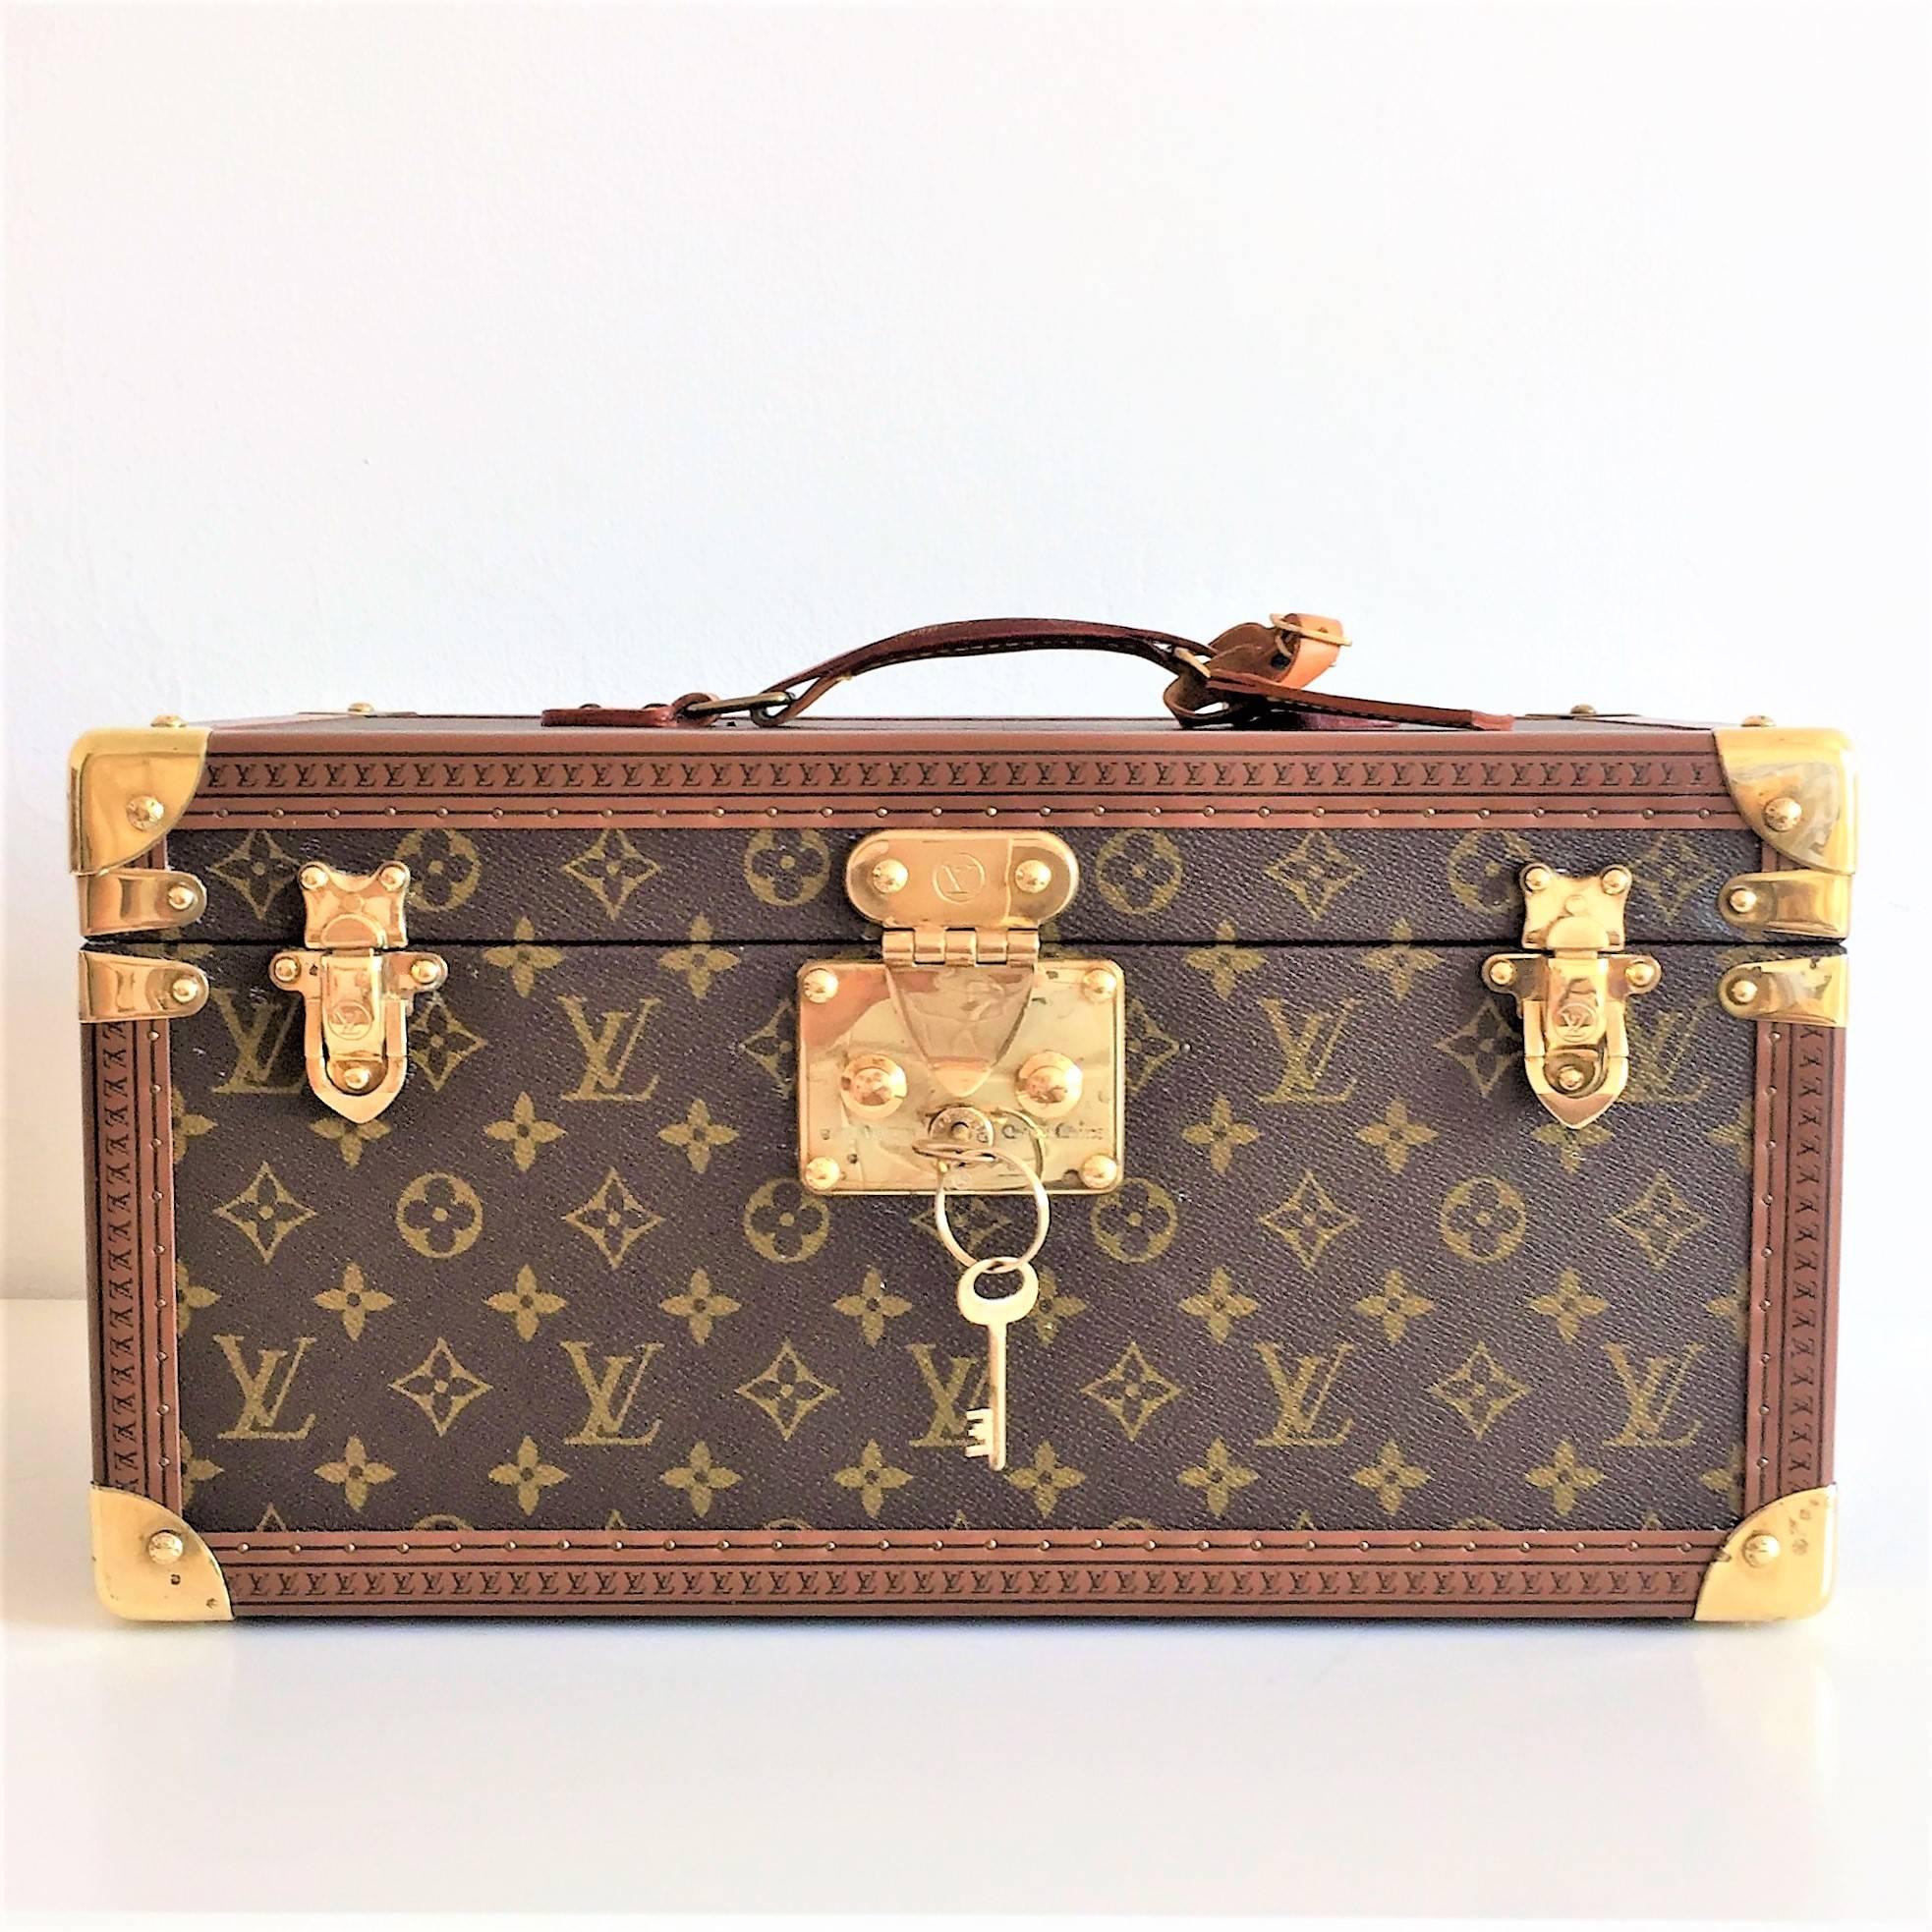 A classic, romantic Vuitton Beauty Case with mirror in very good condition with some signs of usage.
dim.:16.5 x 9.1 x 8.3 inches 
(Length x Height x Width) 
- Monogram canvas, natural cowhide handle
- Golden brass pieces
- S-lock with key,